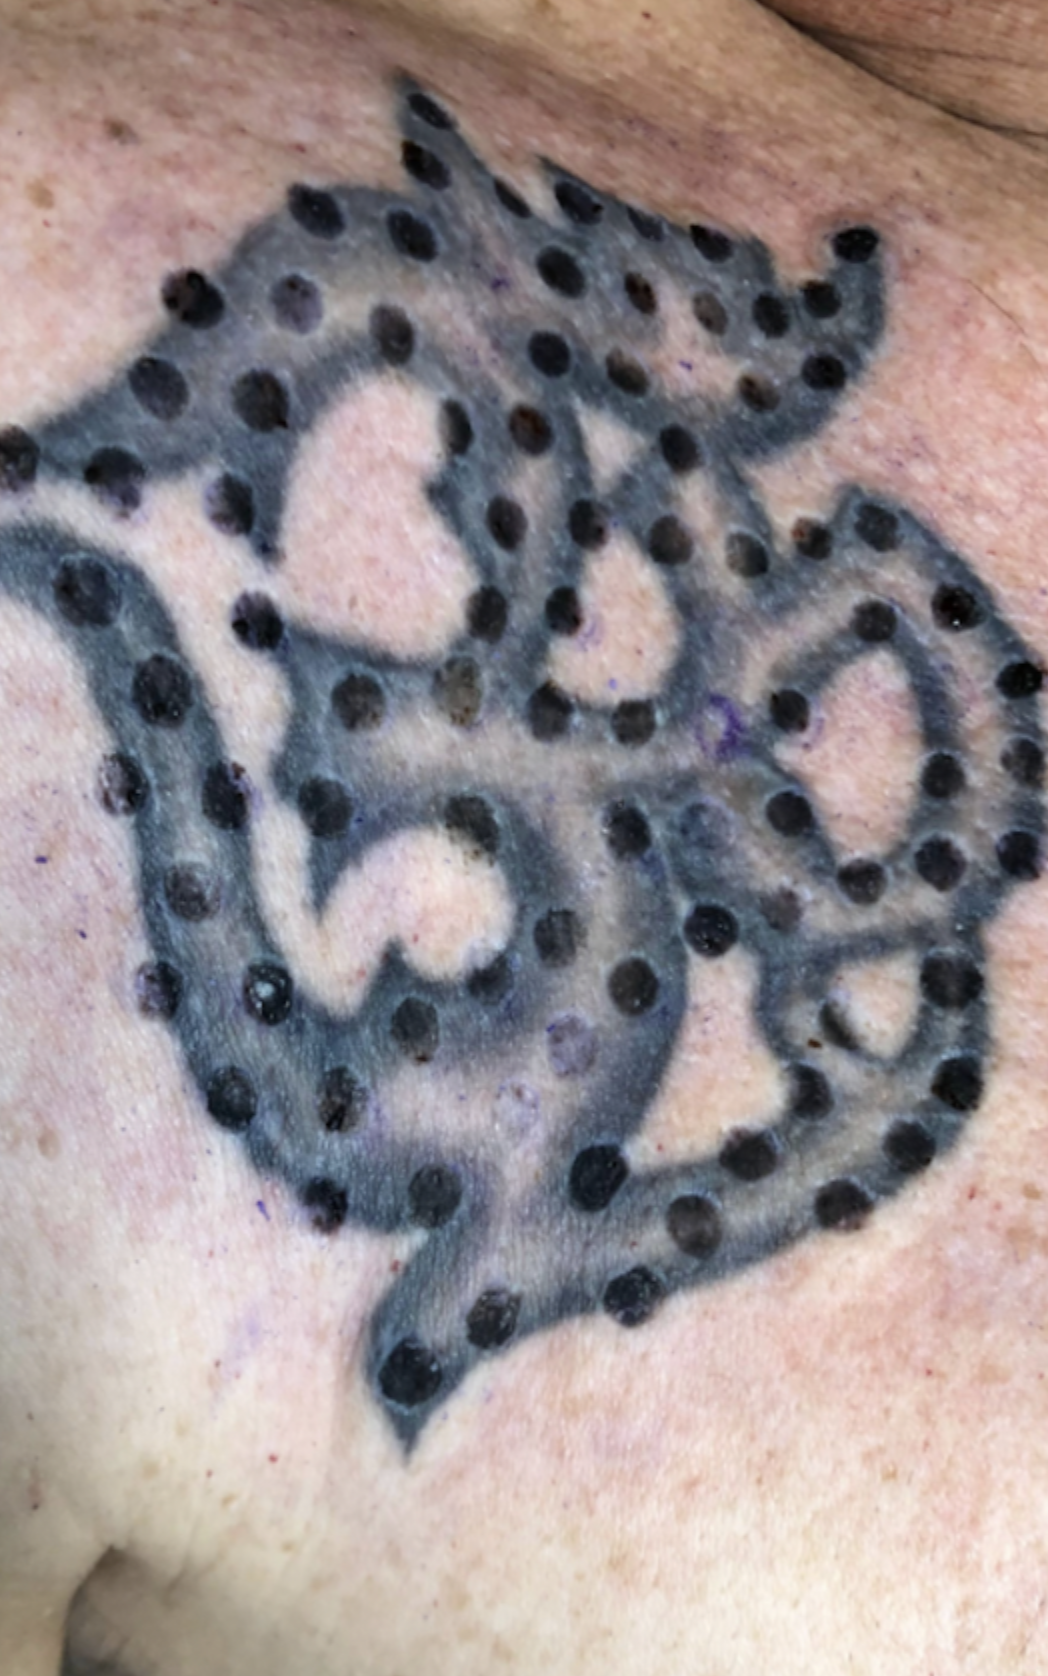 chest tattoo removal during the process